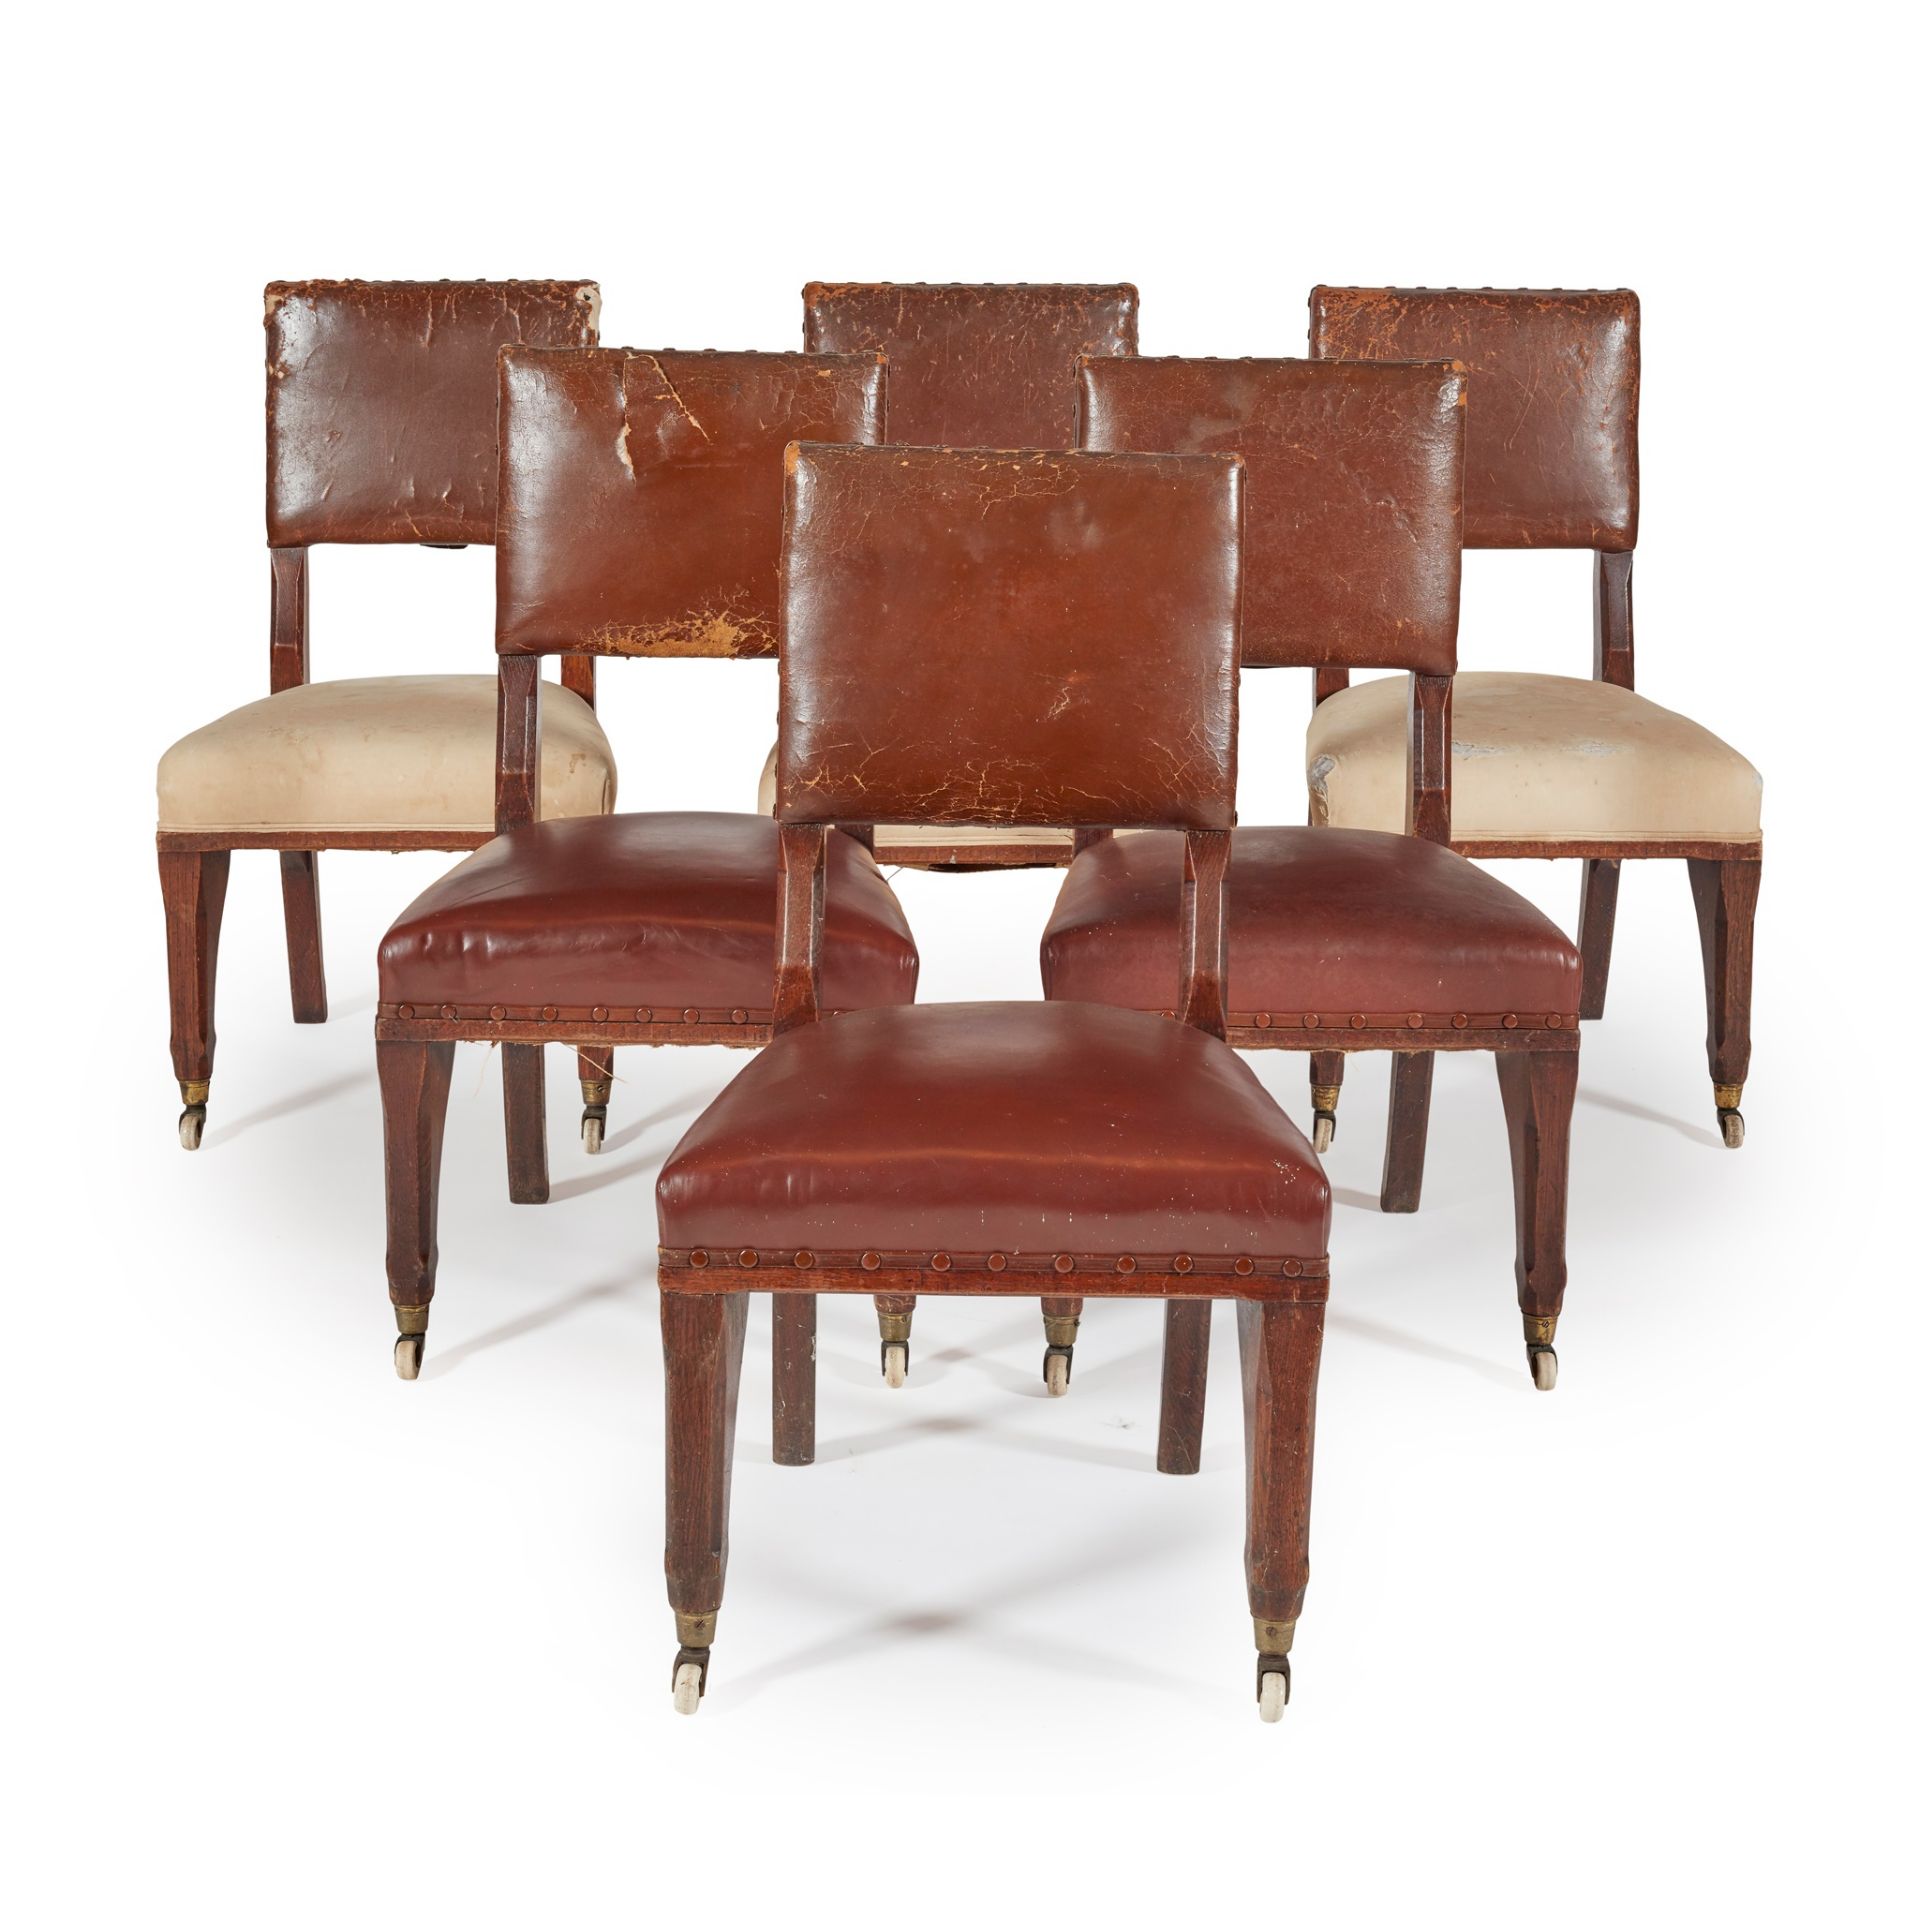 WILLIAM WHITE (1825–1900) SET OF EIGHT GOTHIC REVIVAL DINING CHAIRS, CIRCA 1860